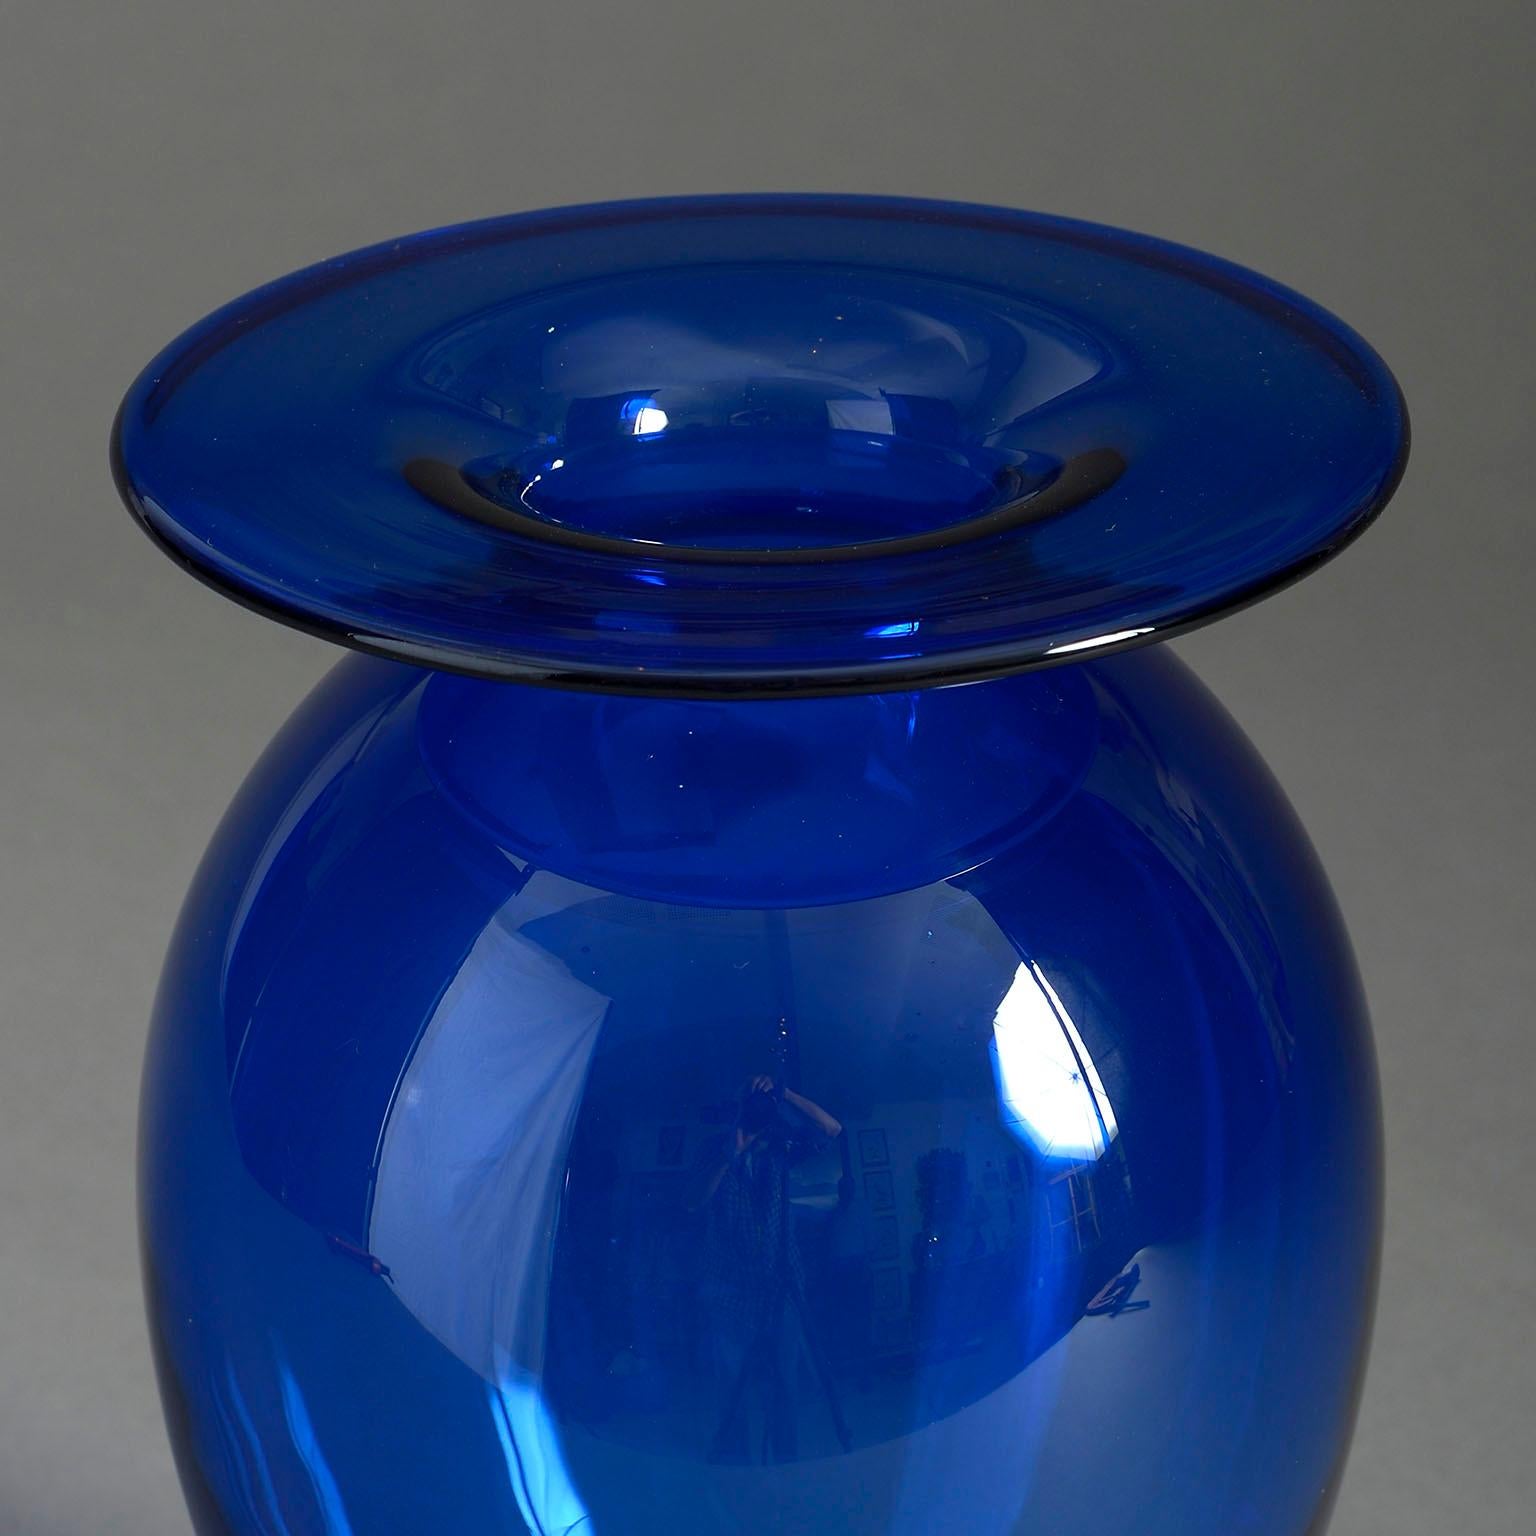 A mid-century deep blue glass vase with generous rim and bulbous body.